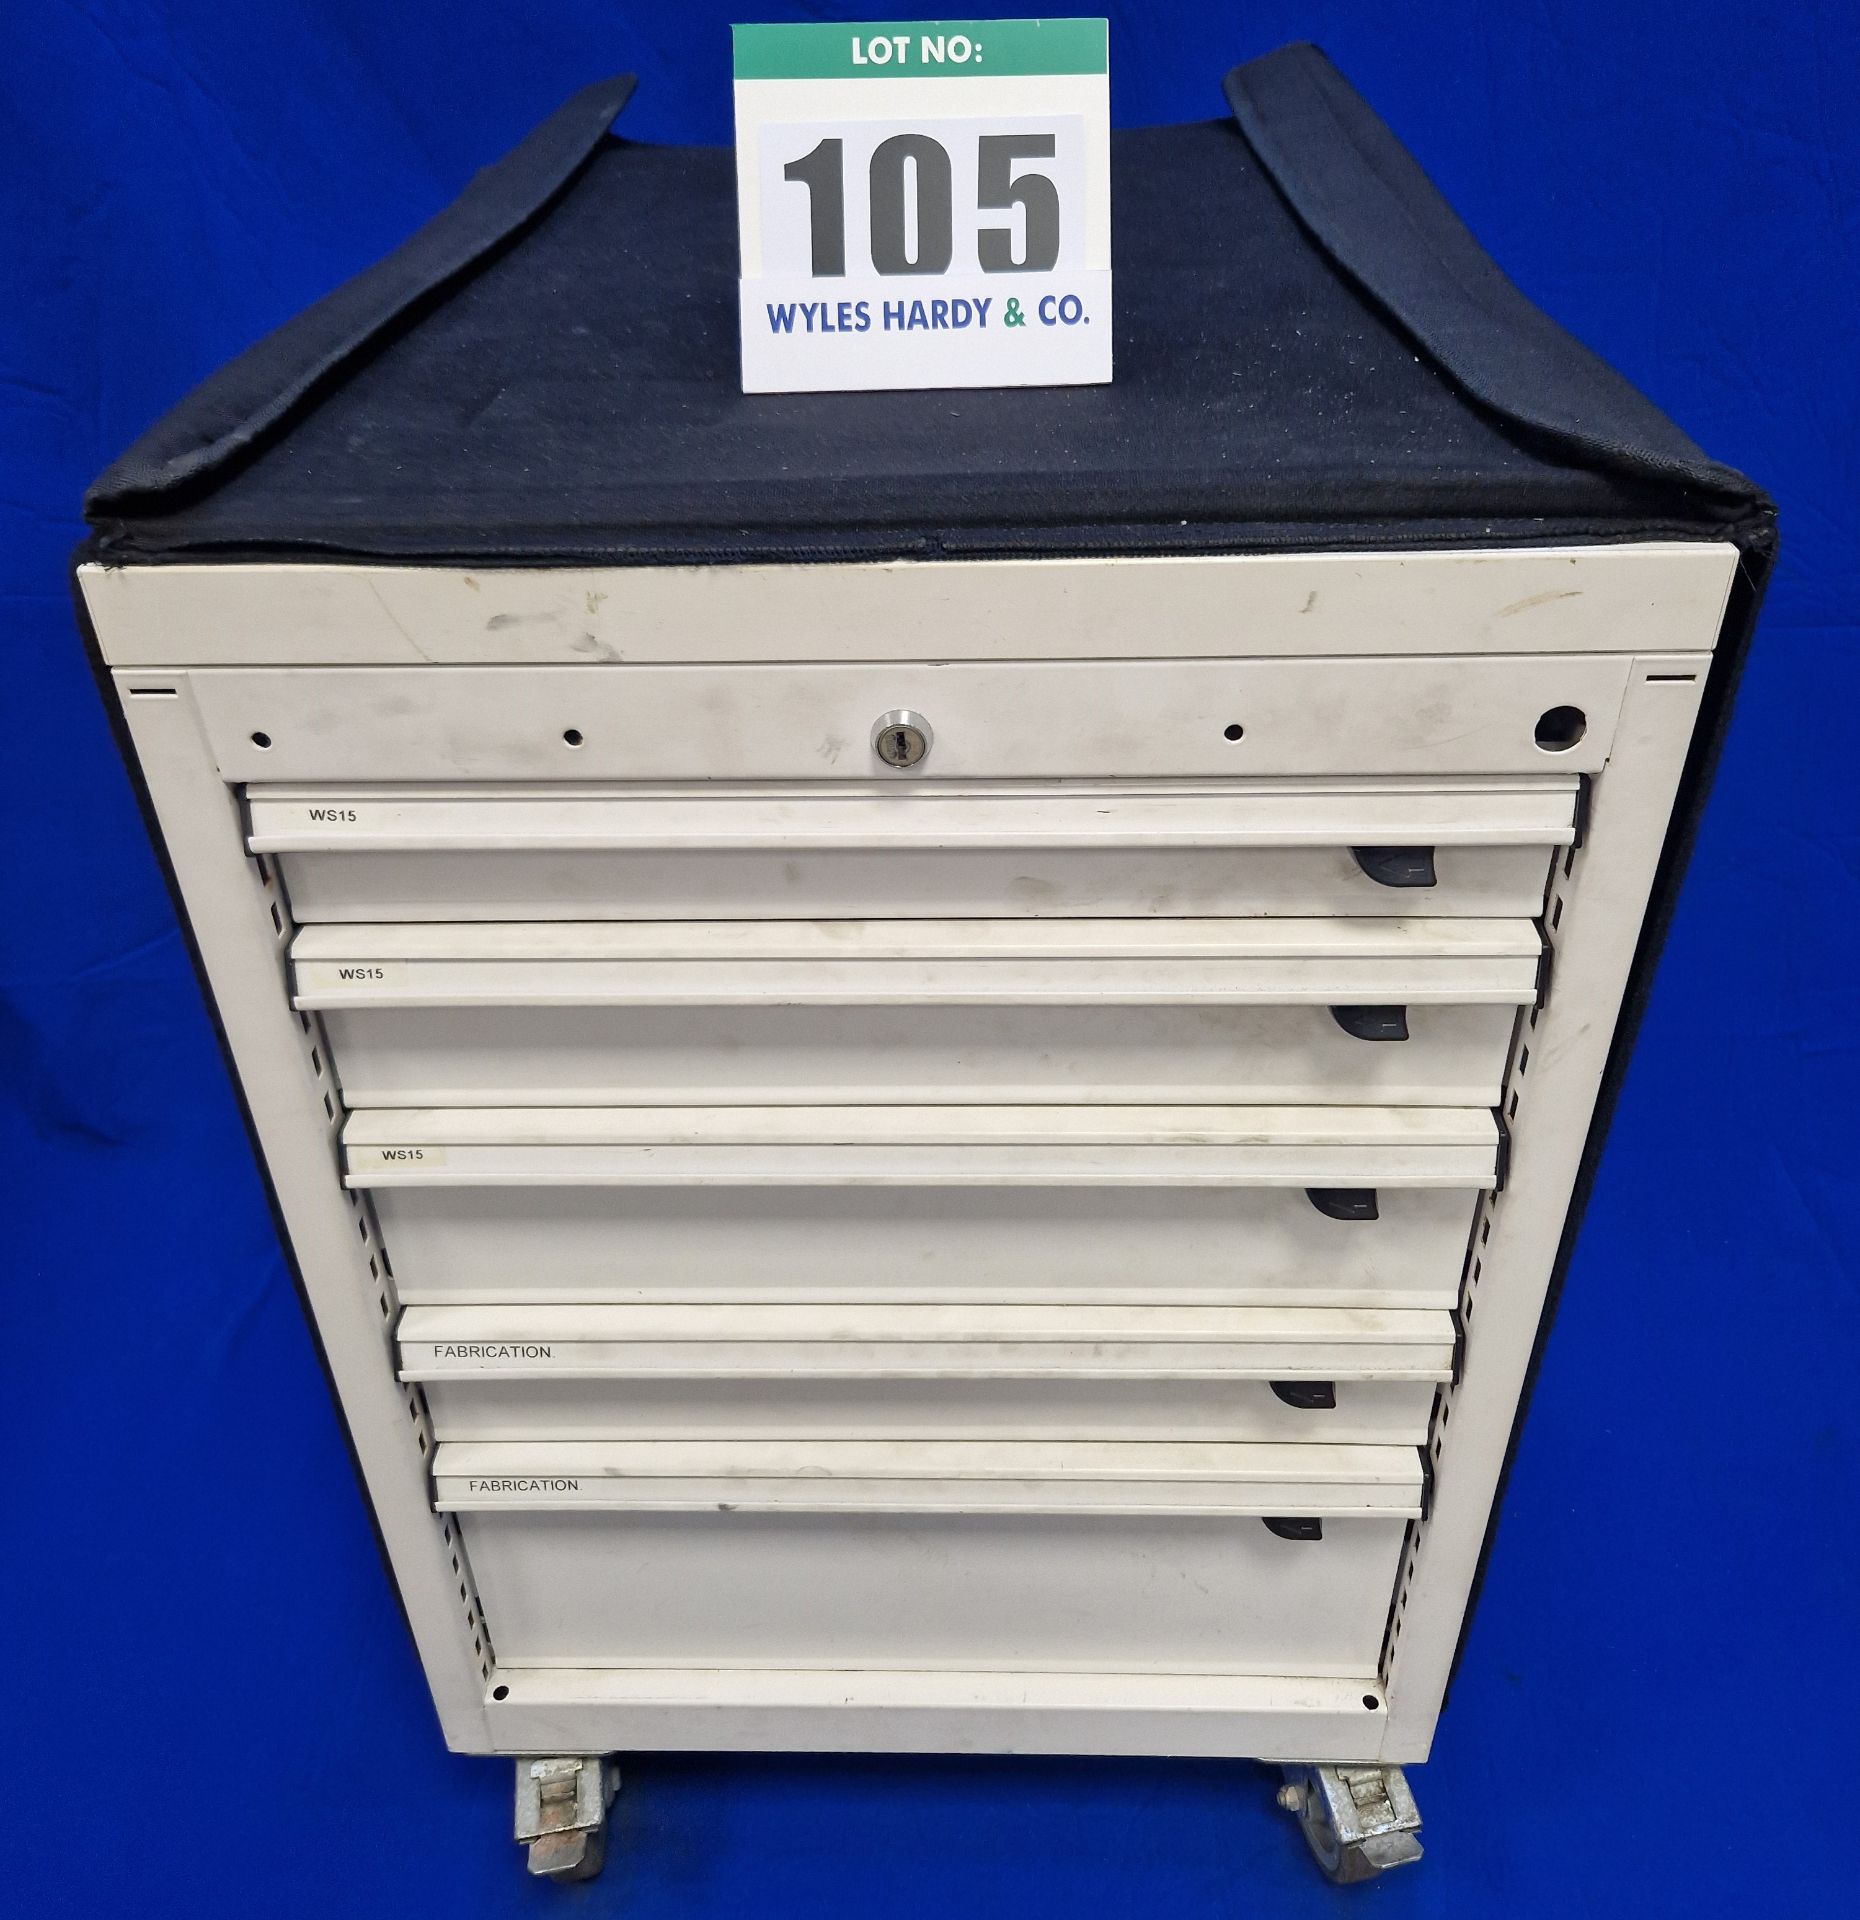 One FAMI 5-Drawer Castor mounted Mechanics Tool Chest with Tailored Soft Transportation Cover